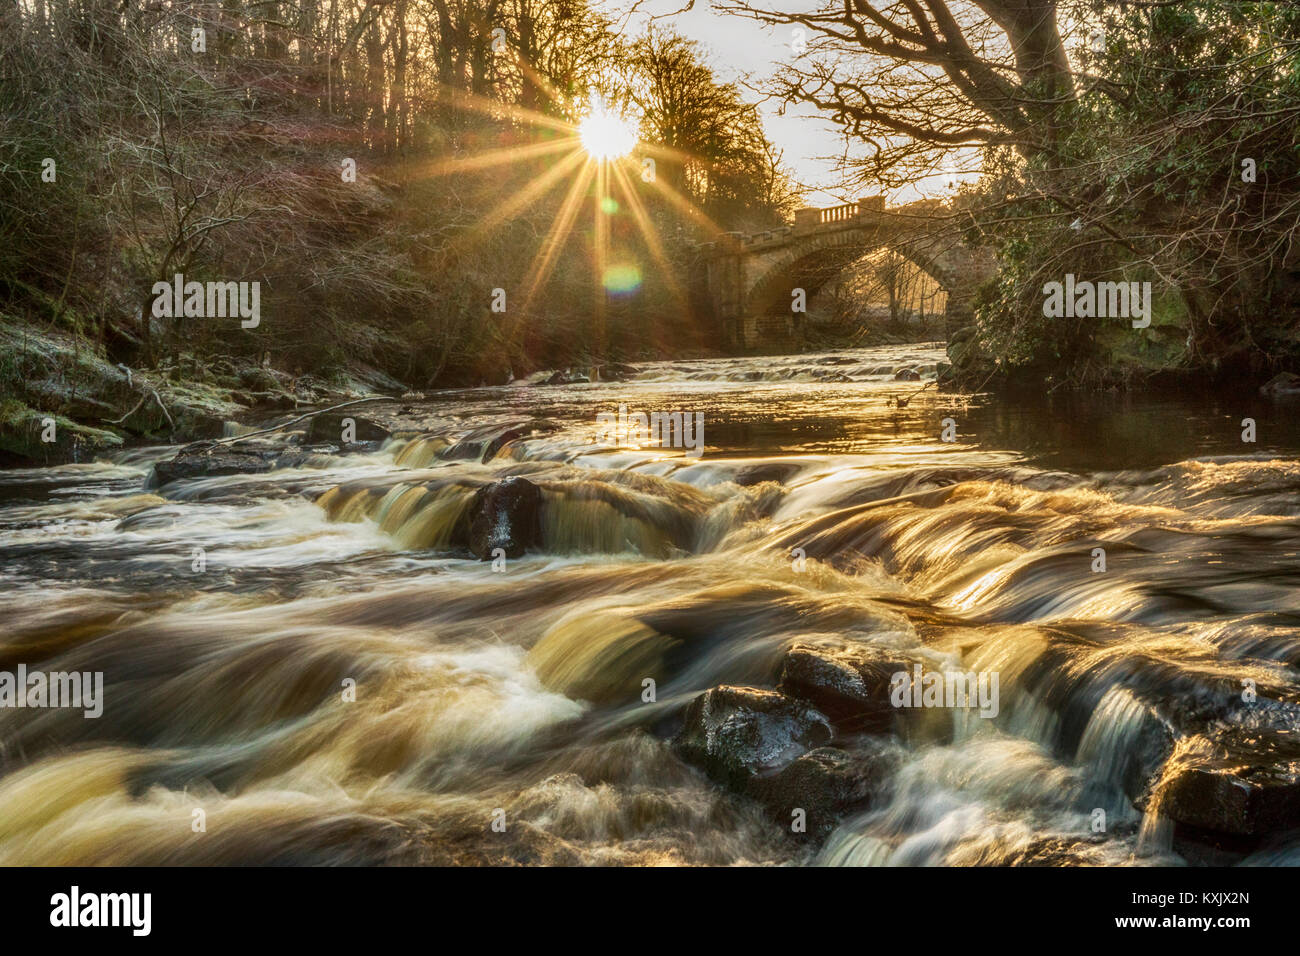 This is the River Almond, flowing under the Nasmyth Bridge in Almondell Country Park, near East Calder, West Lothian. Stock Photo